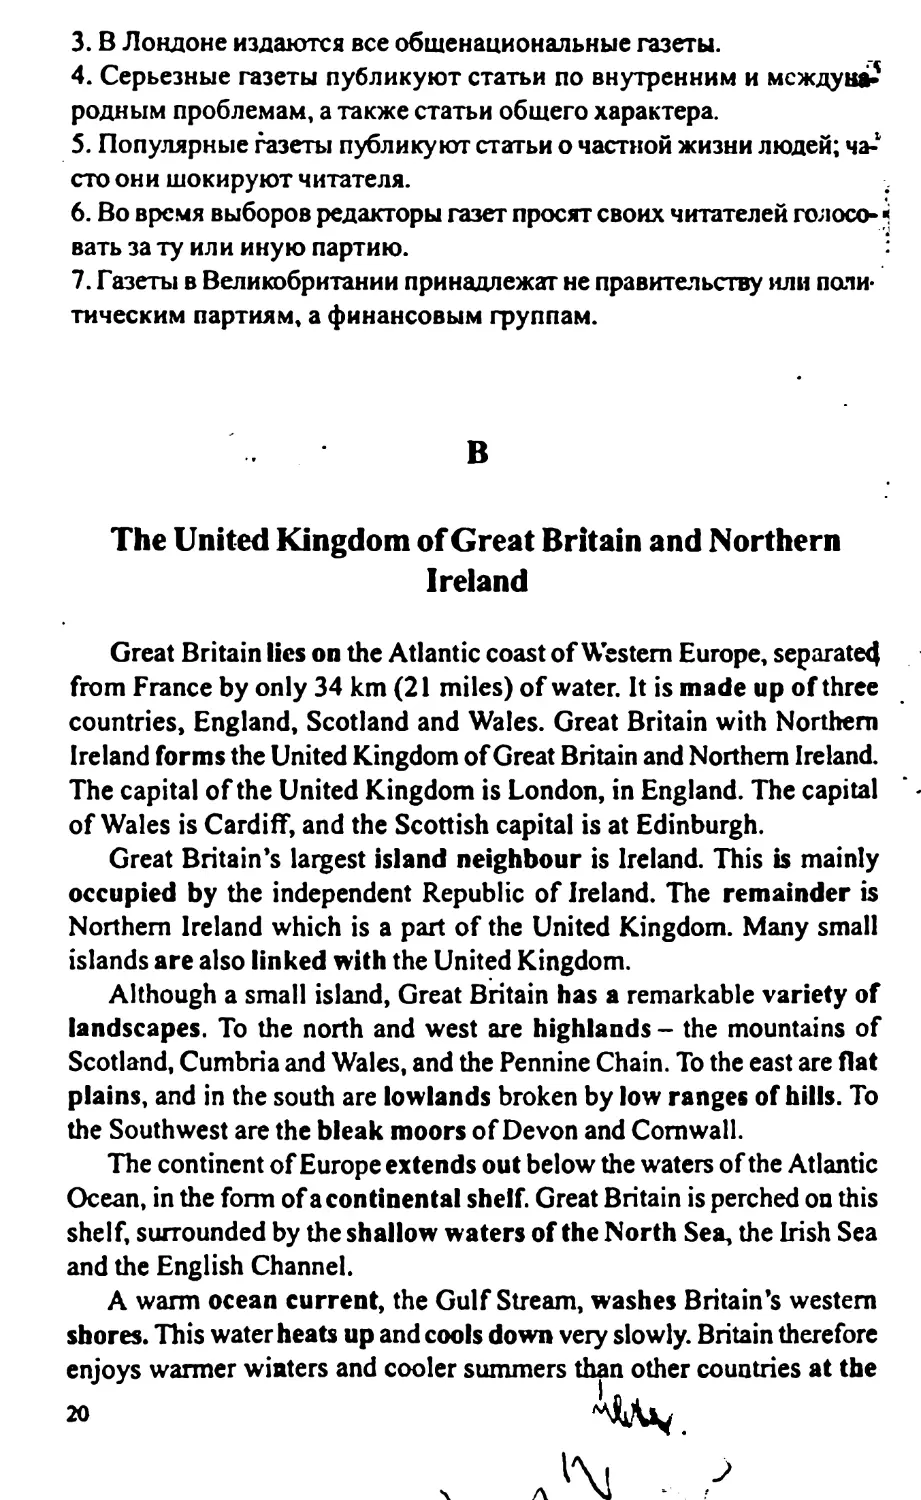 The United Kingdom of Great Britain and Northern
Ireland
B. The United Kingdom of Great Britain and Northern Ireland